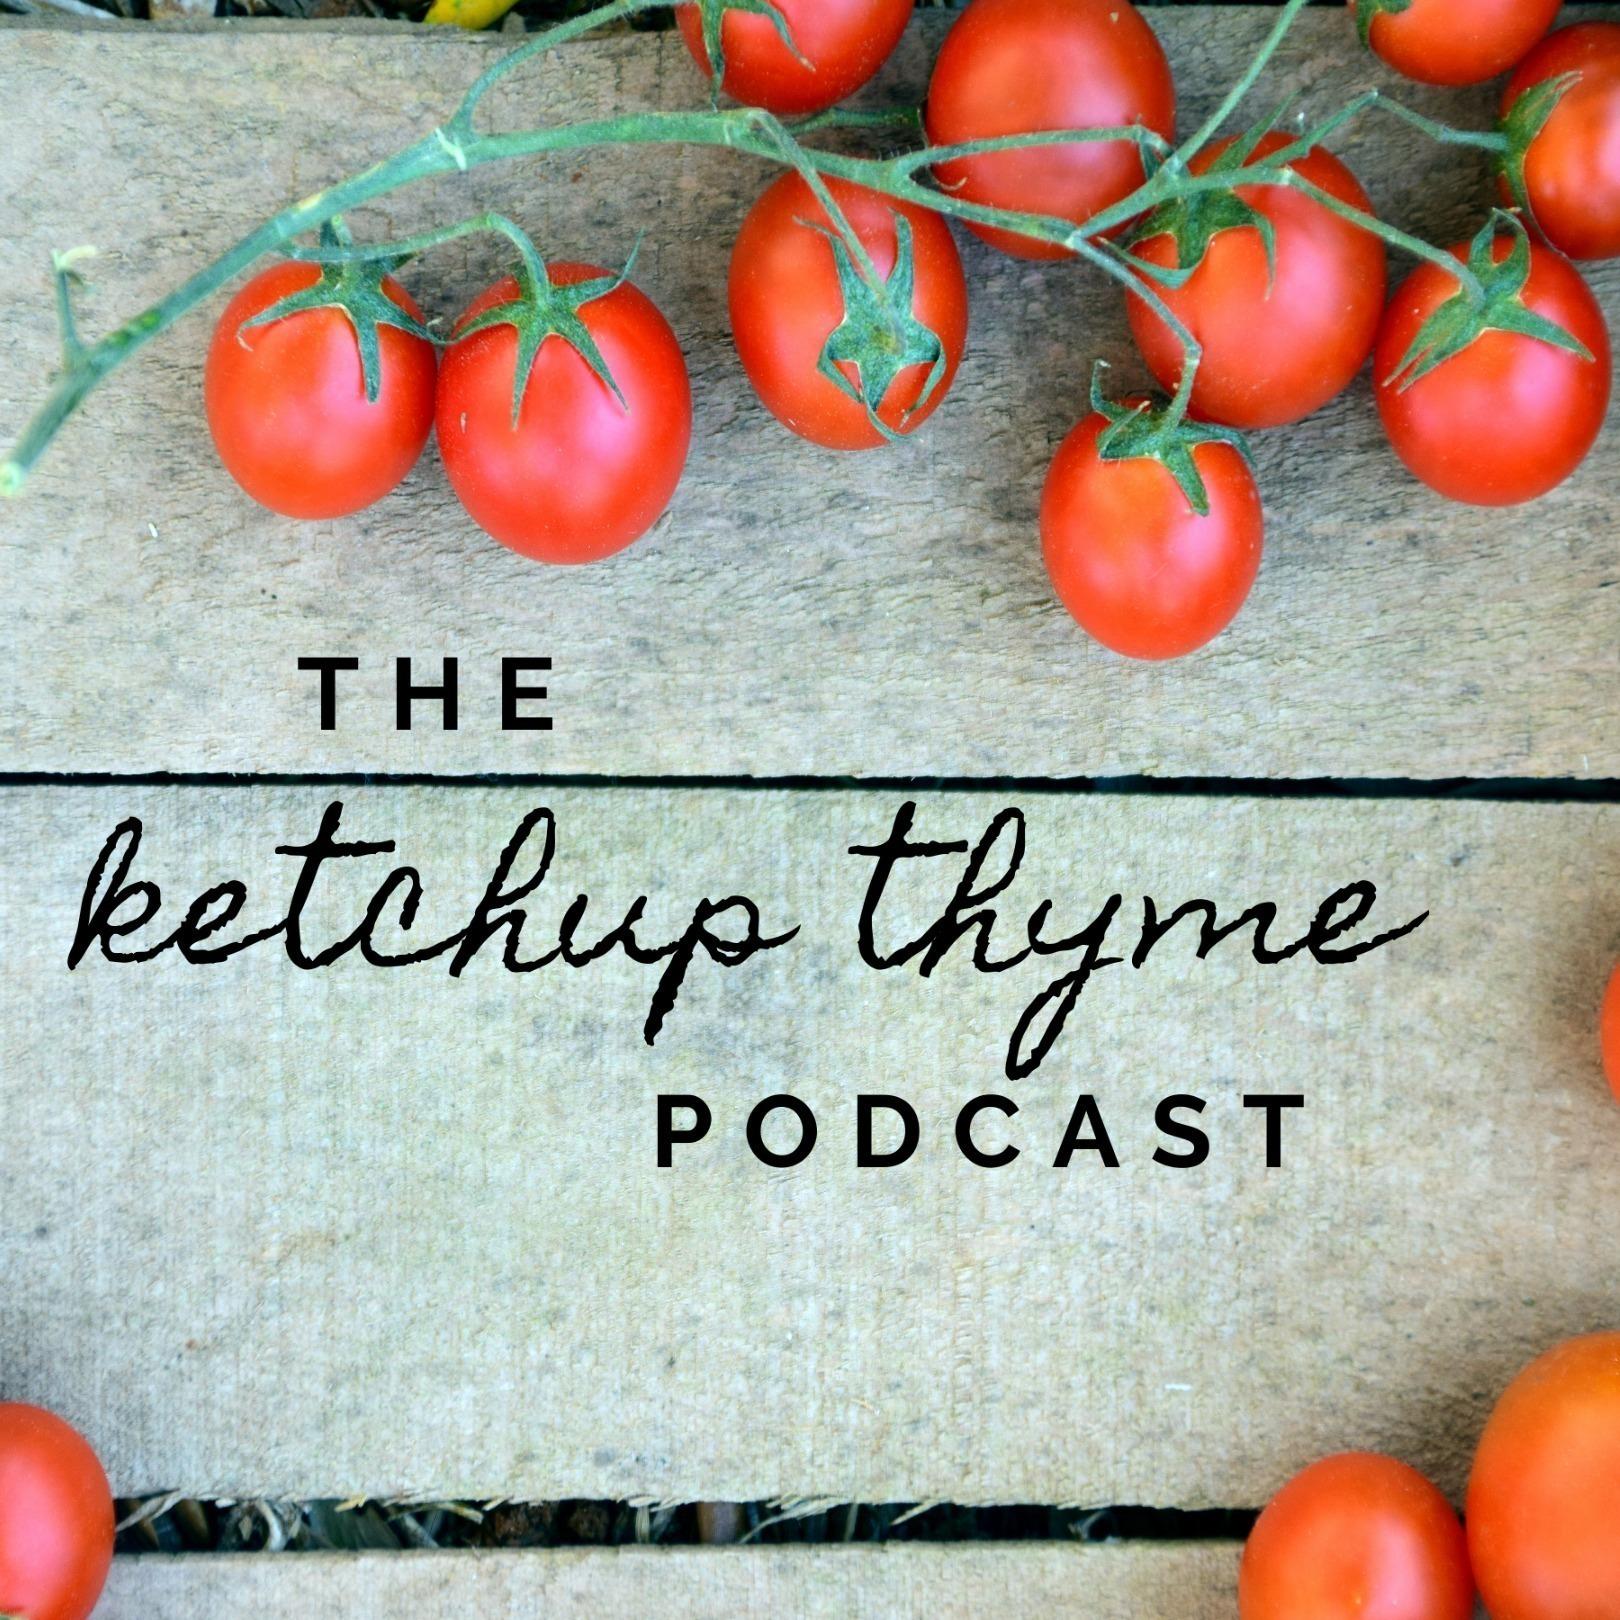 The Ketchup Thyme Podcast